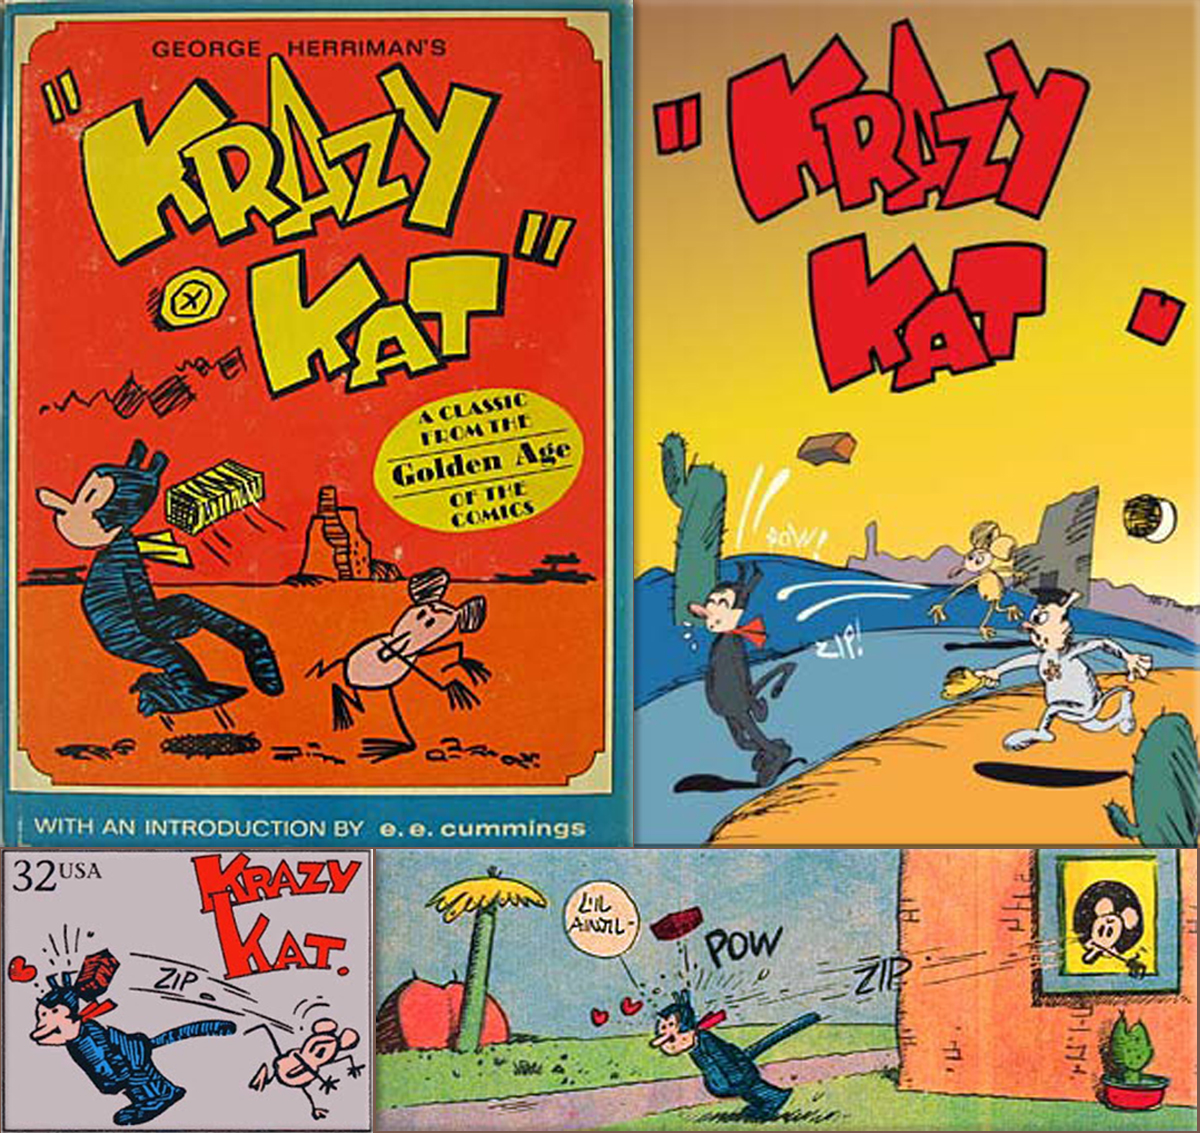 The final page of the comic Krazy Kat was published, exactly two months after its author George Herriman died